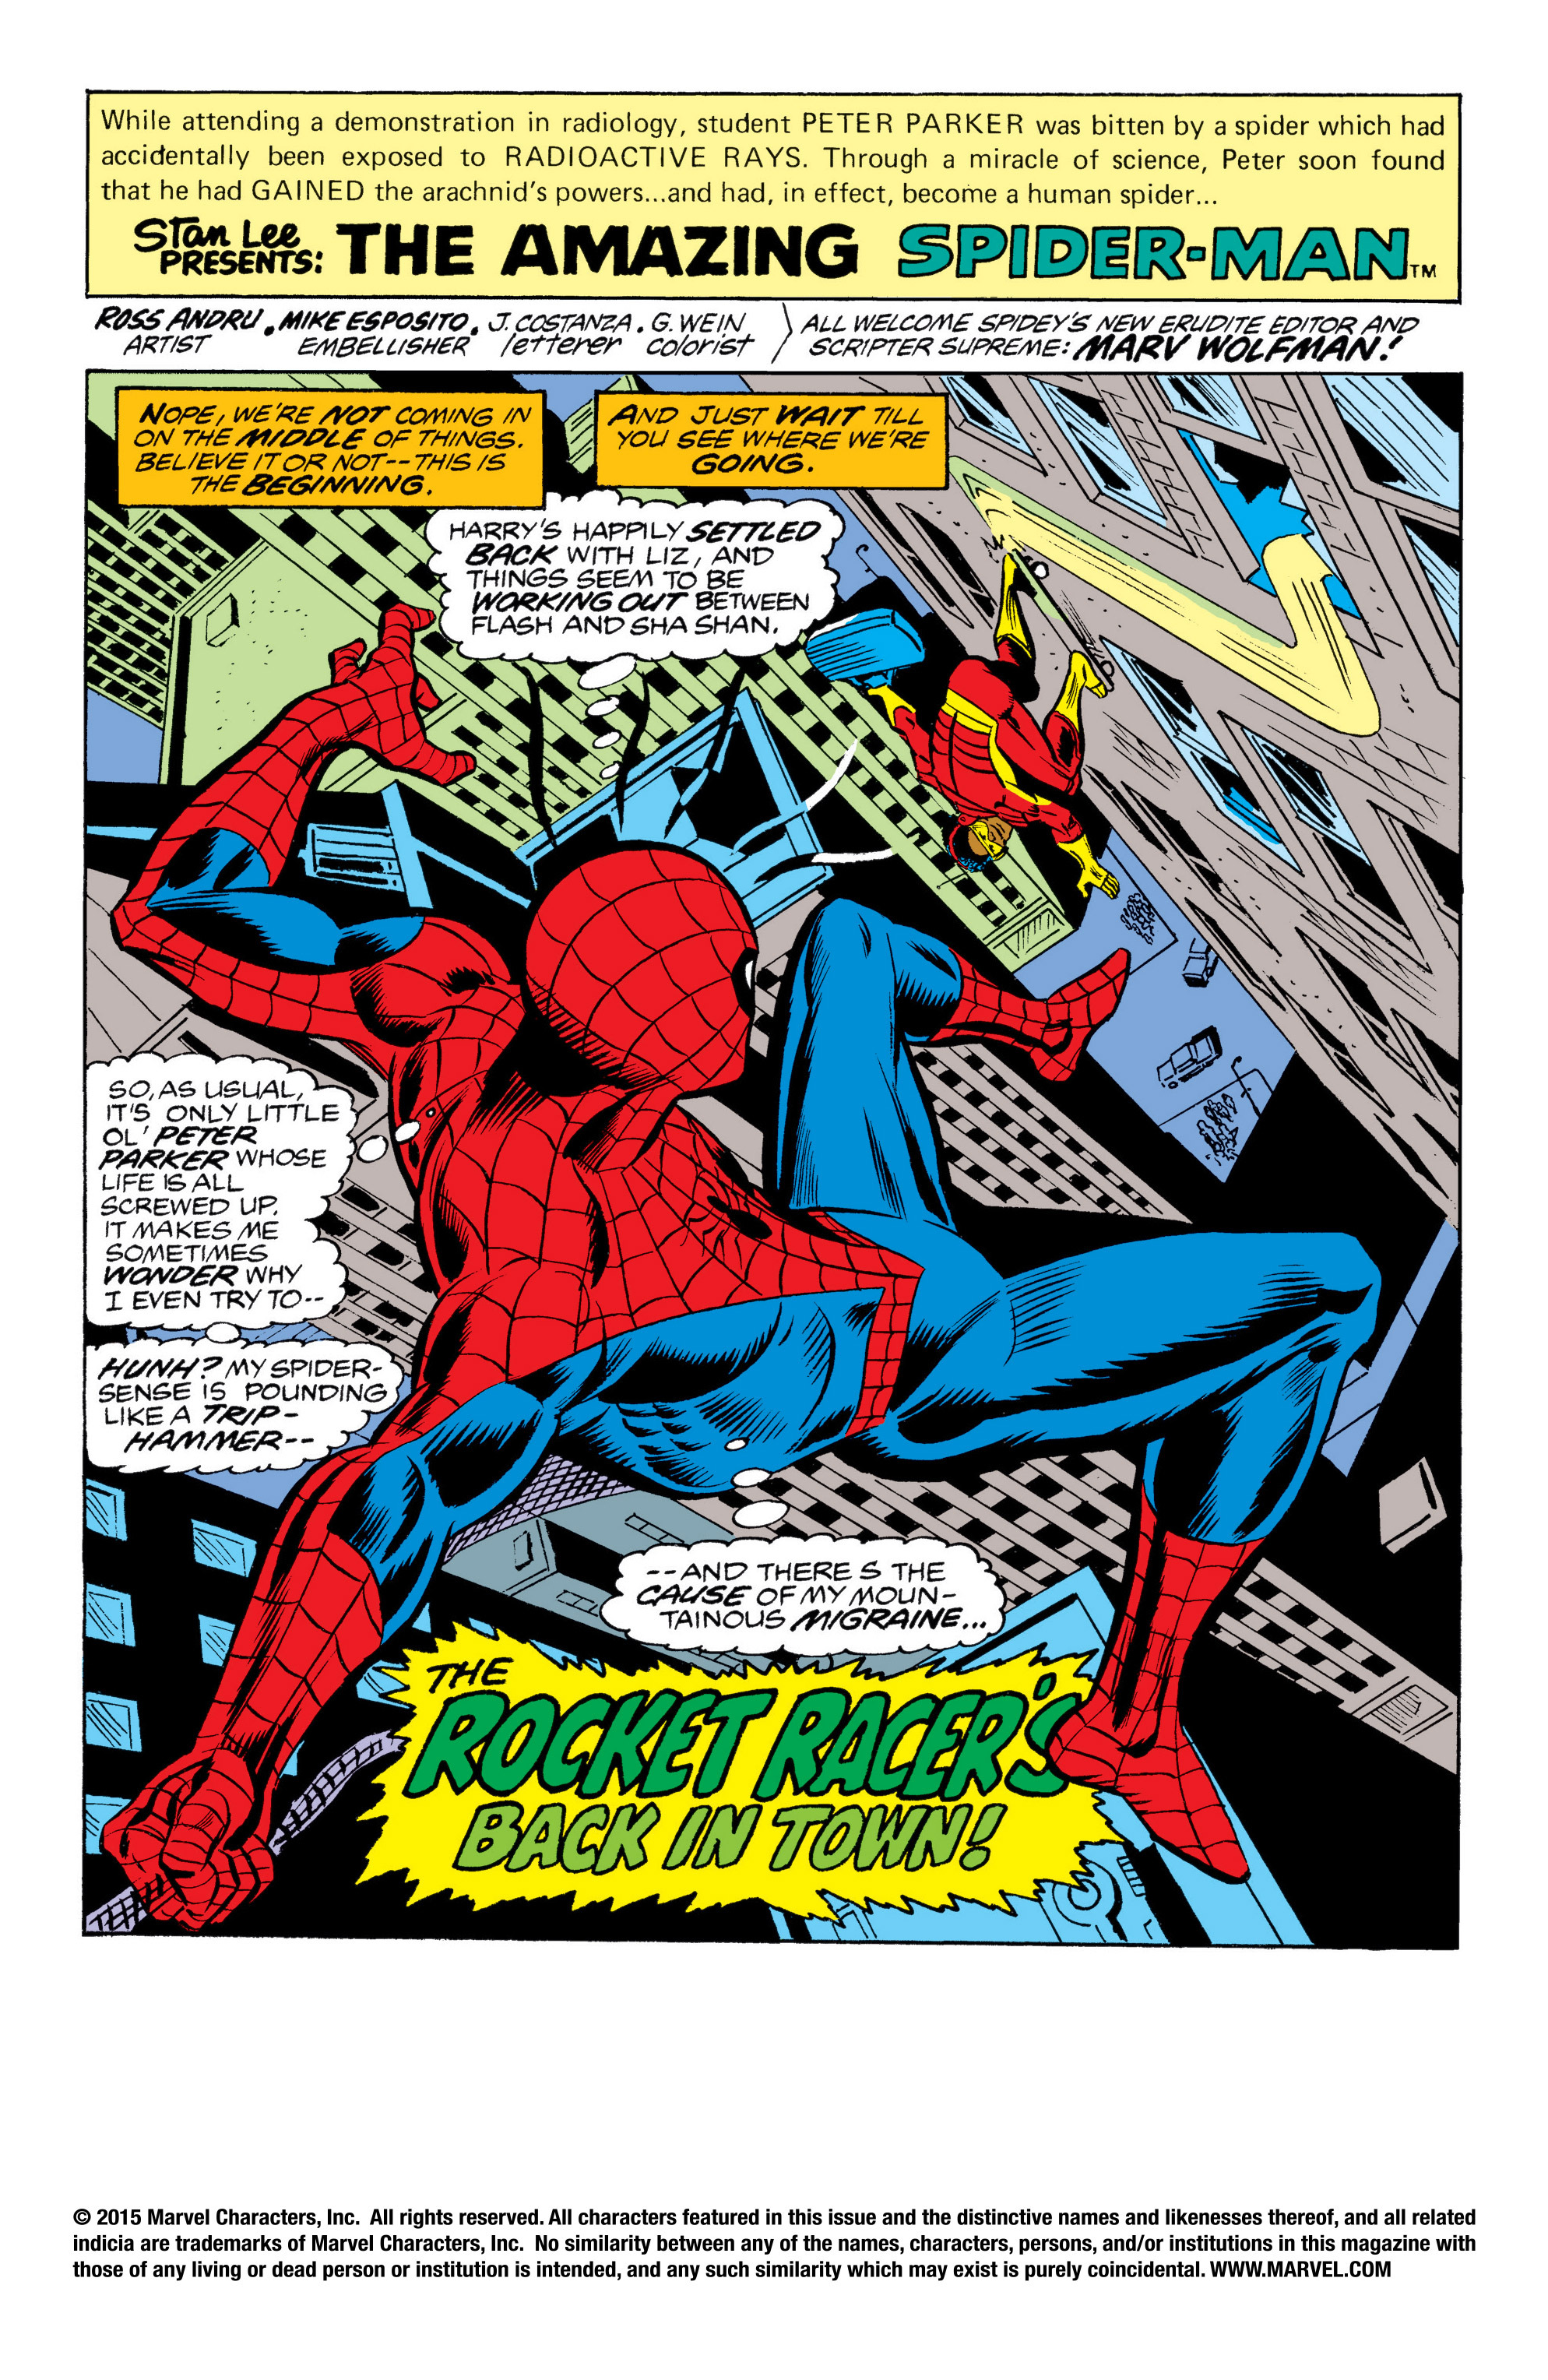 The Amazing Spider-Man (1963) 182 Page 1